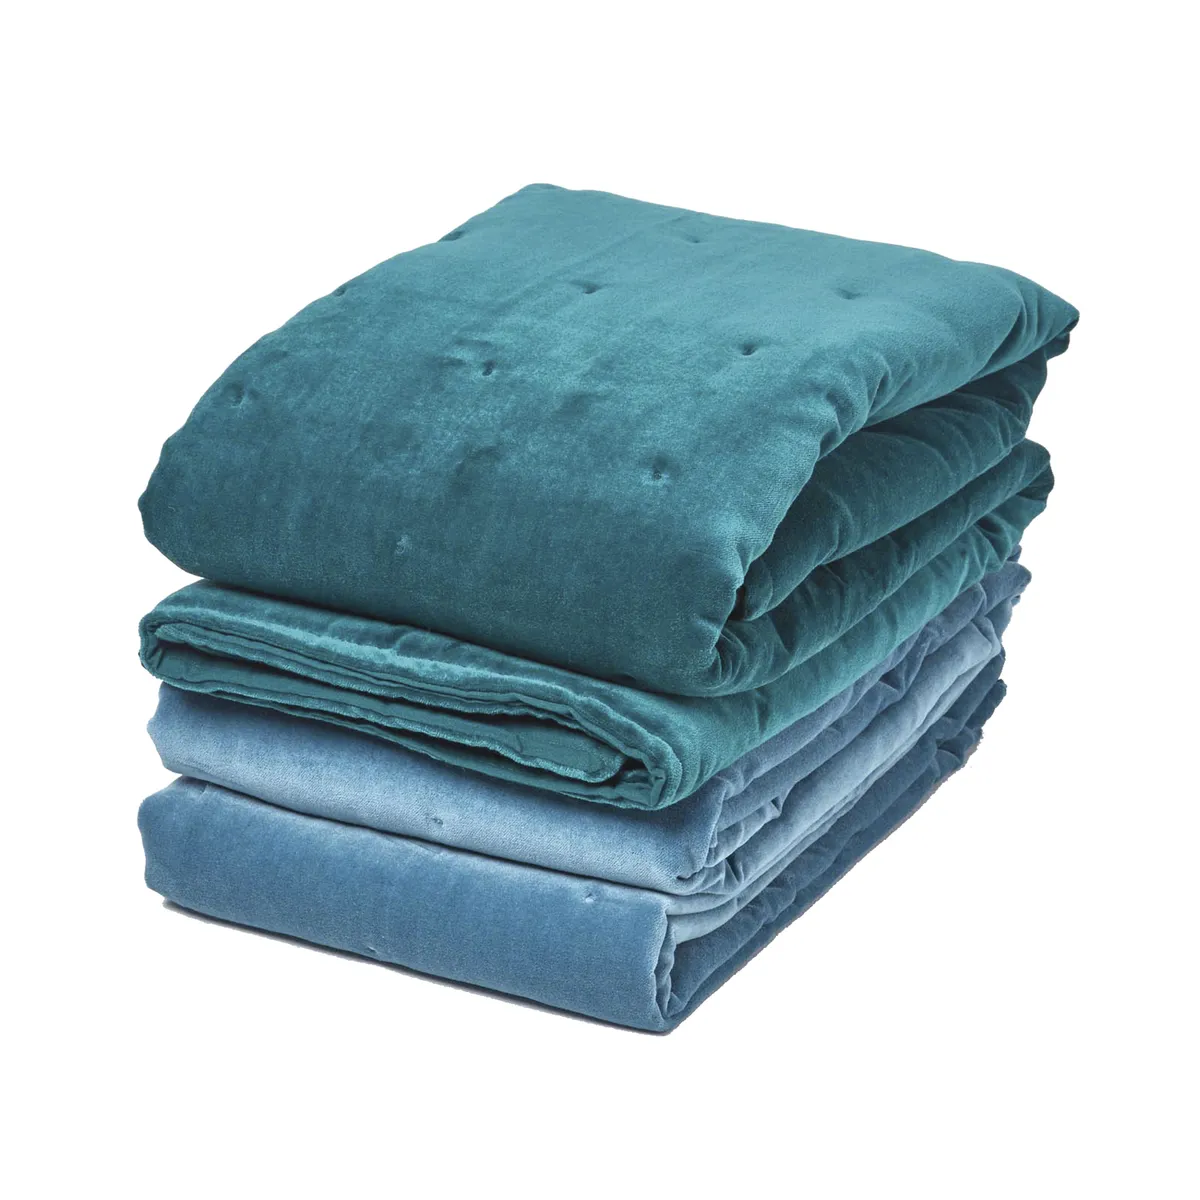 Quilted velvet throws, £29.99 each, Homescapes